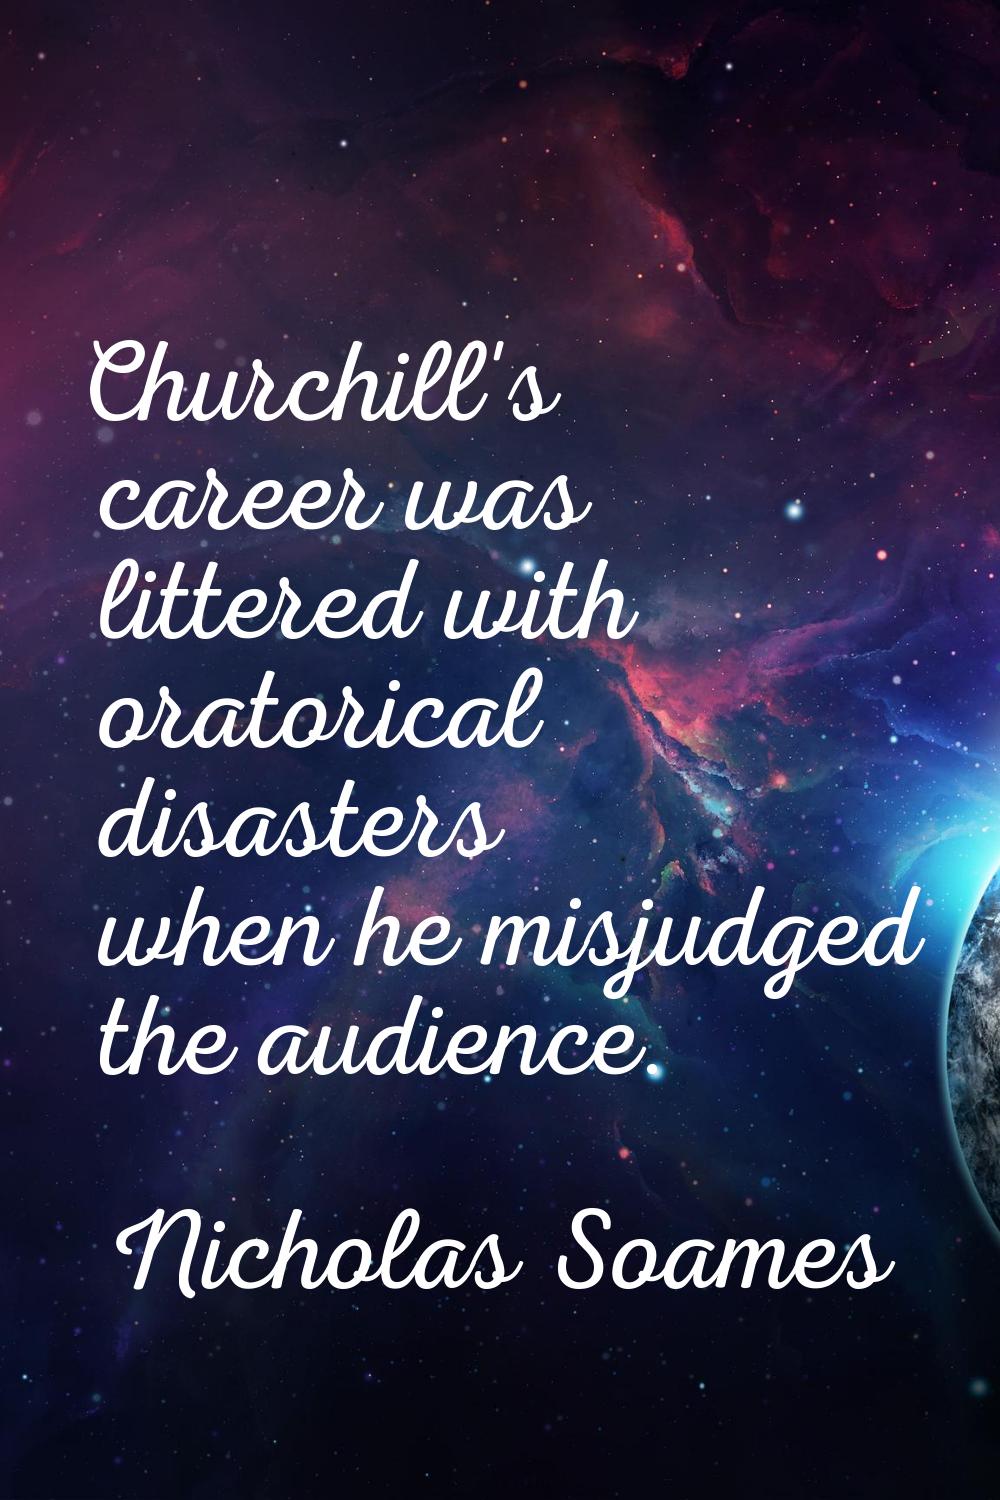 Churchill's career was littered with oratorical disasters when he misjudged the audience.